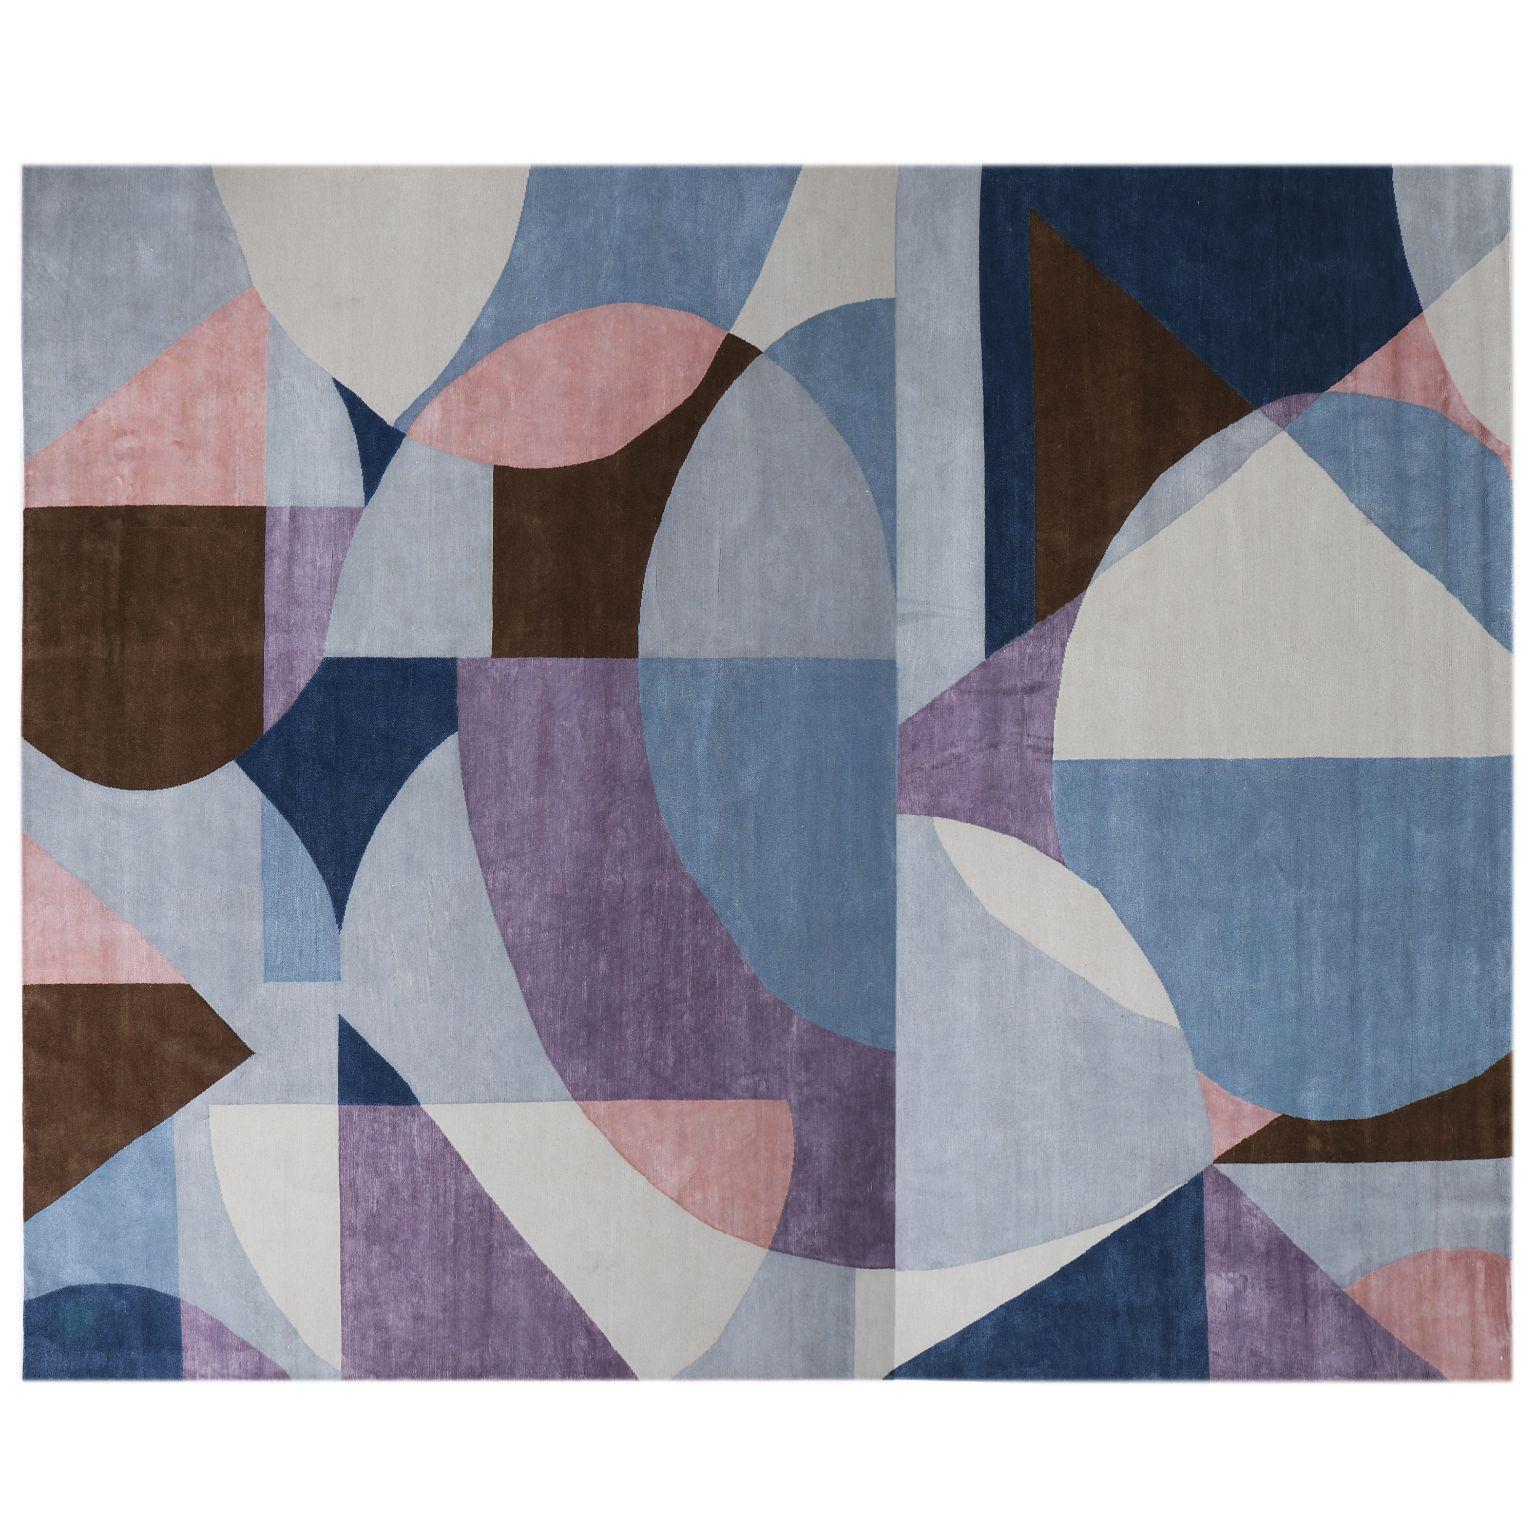 Pastel shapes small rug by Art & Loom
Dimensions: D 243.4 x H 304.8 cm
Materials: New Zealand wool & Chinese silk
Quality (Knots per Inch): 100
Also available in different dimensions.

Samantha Gallacher has always had a keen eye for